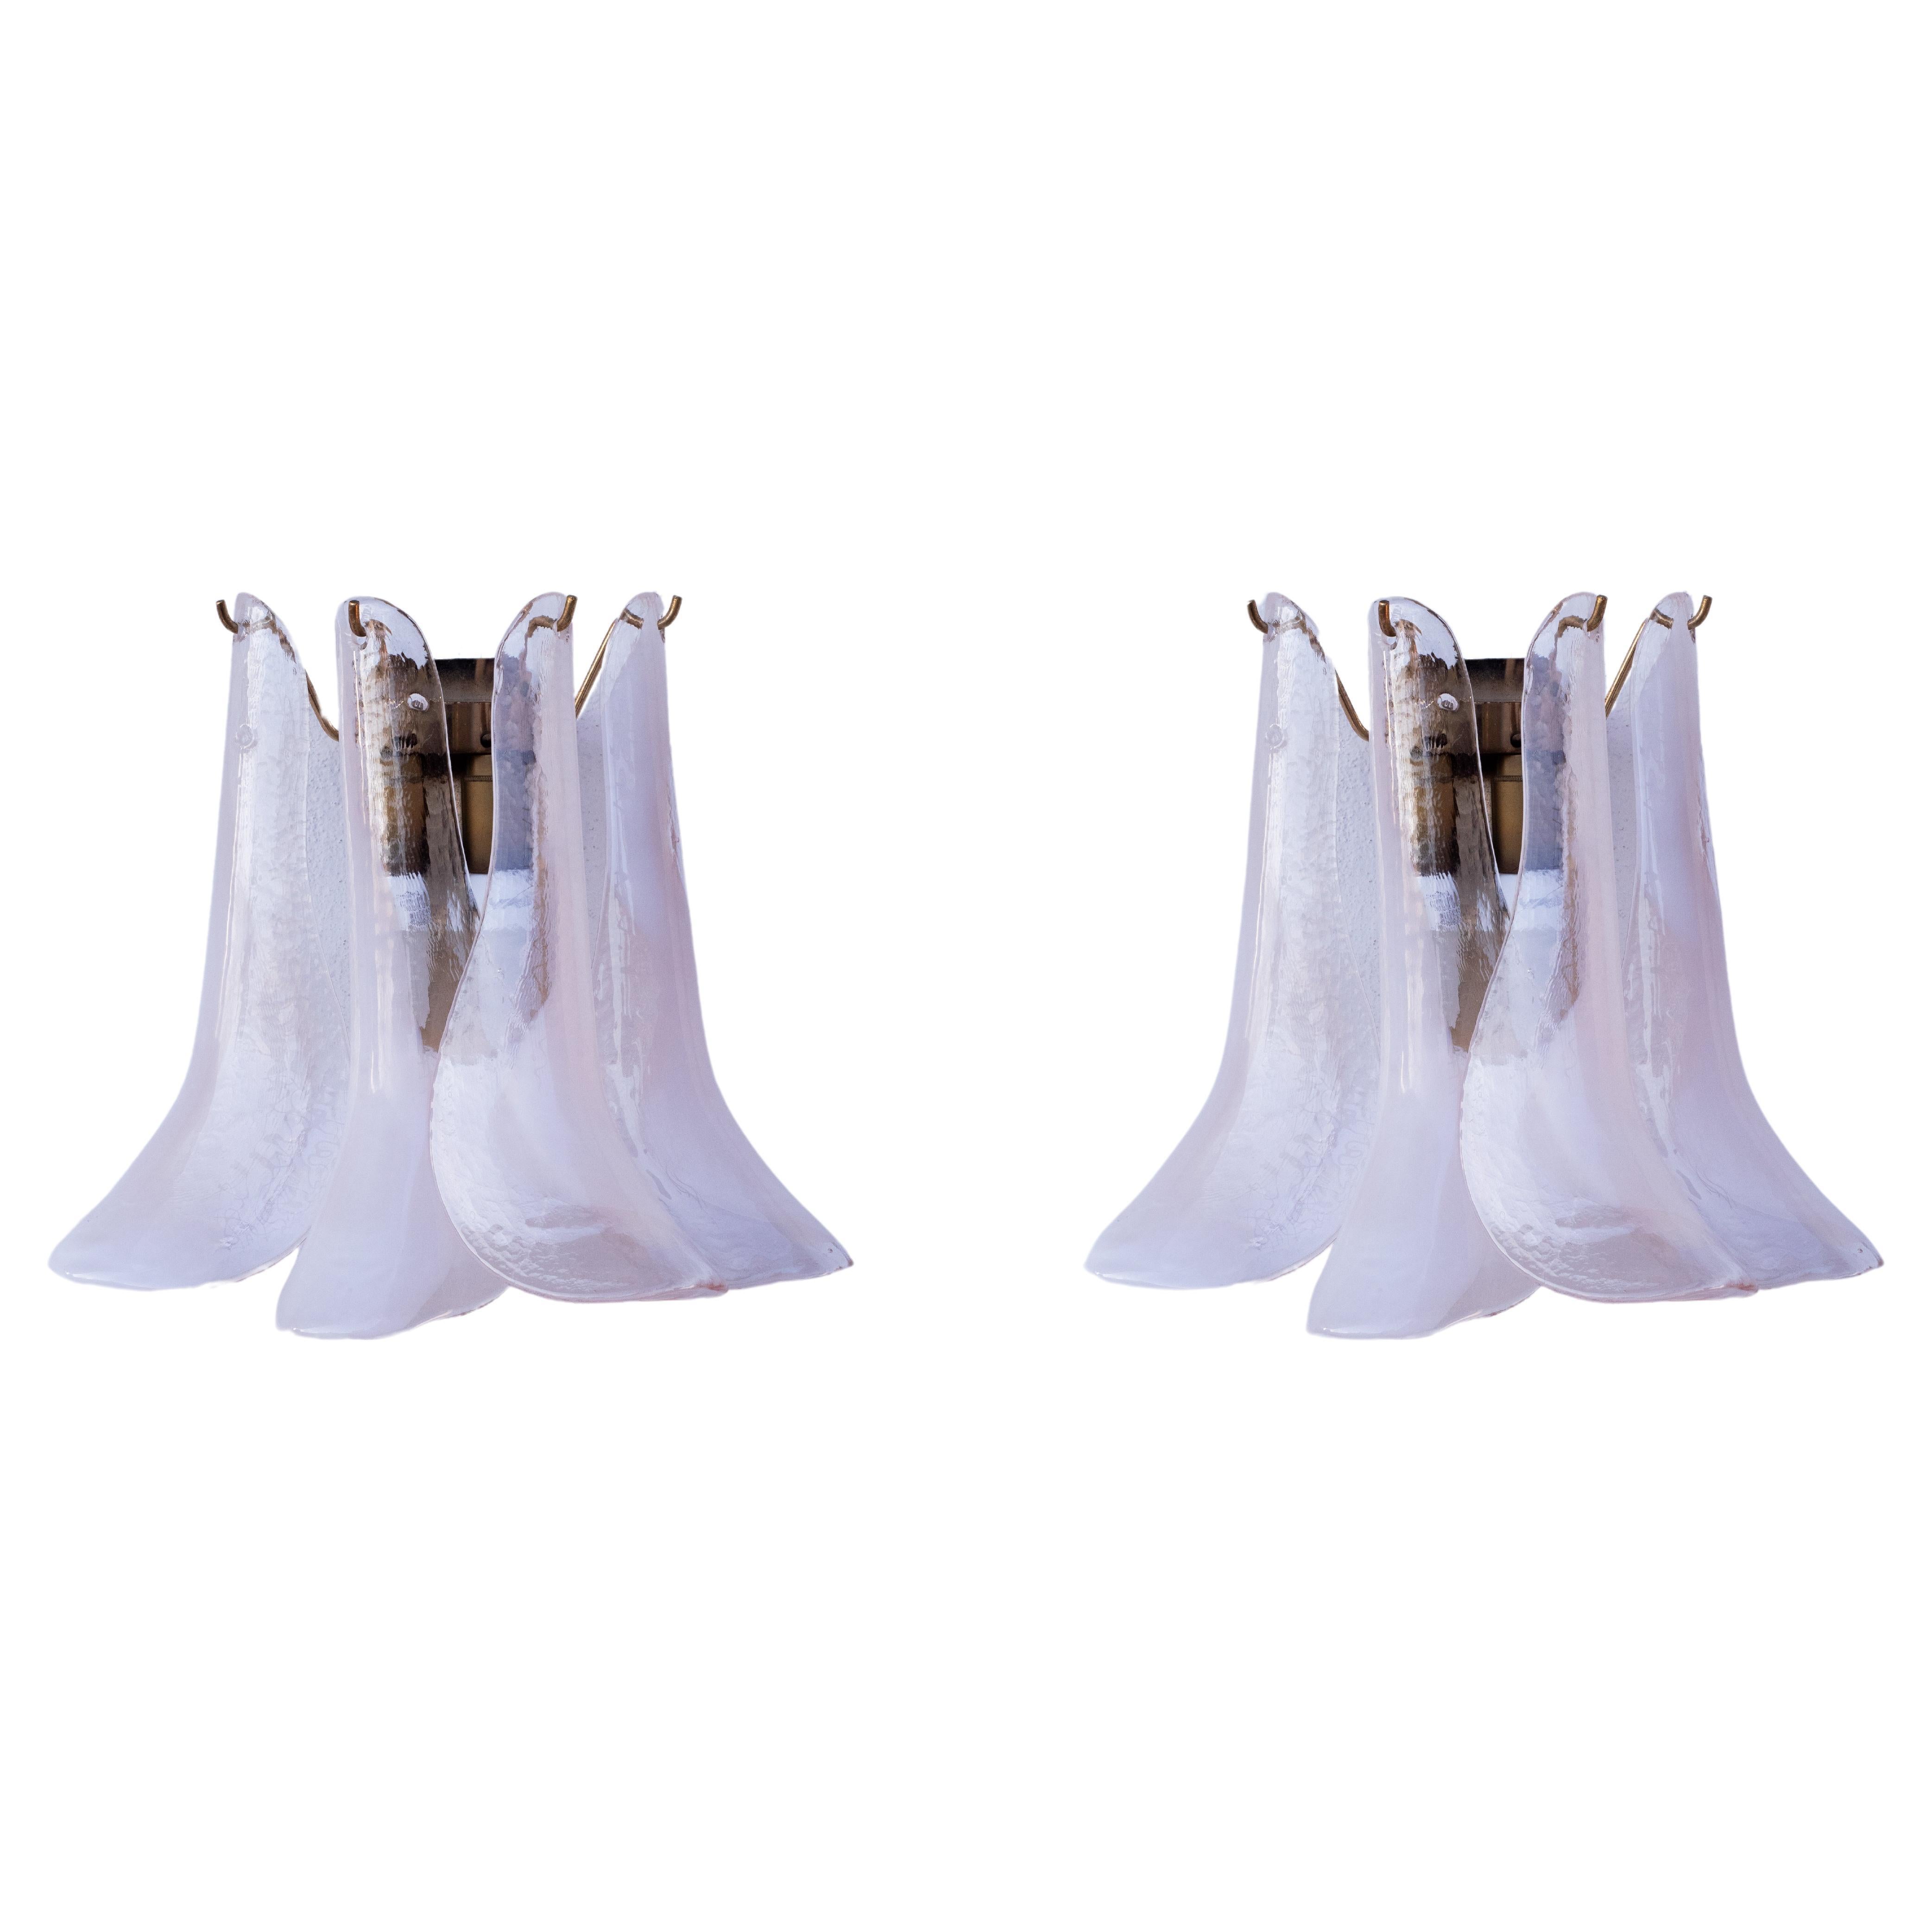 Pair of Vintage Italian Murano Wall Lights, White and Pink Glass Petals